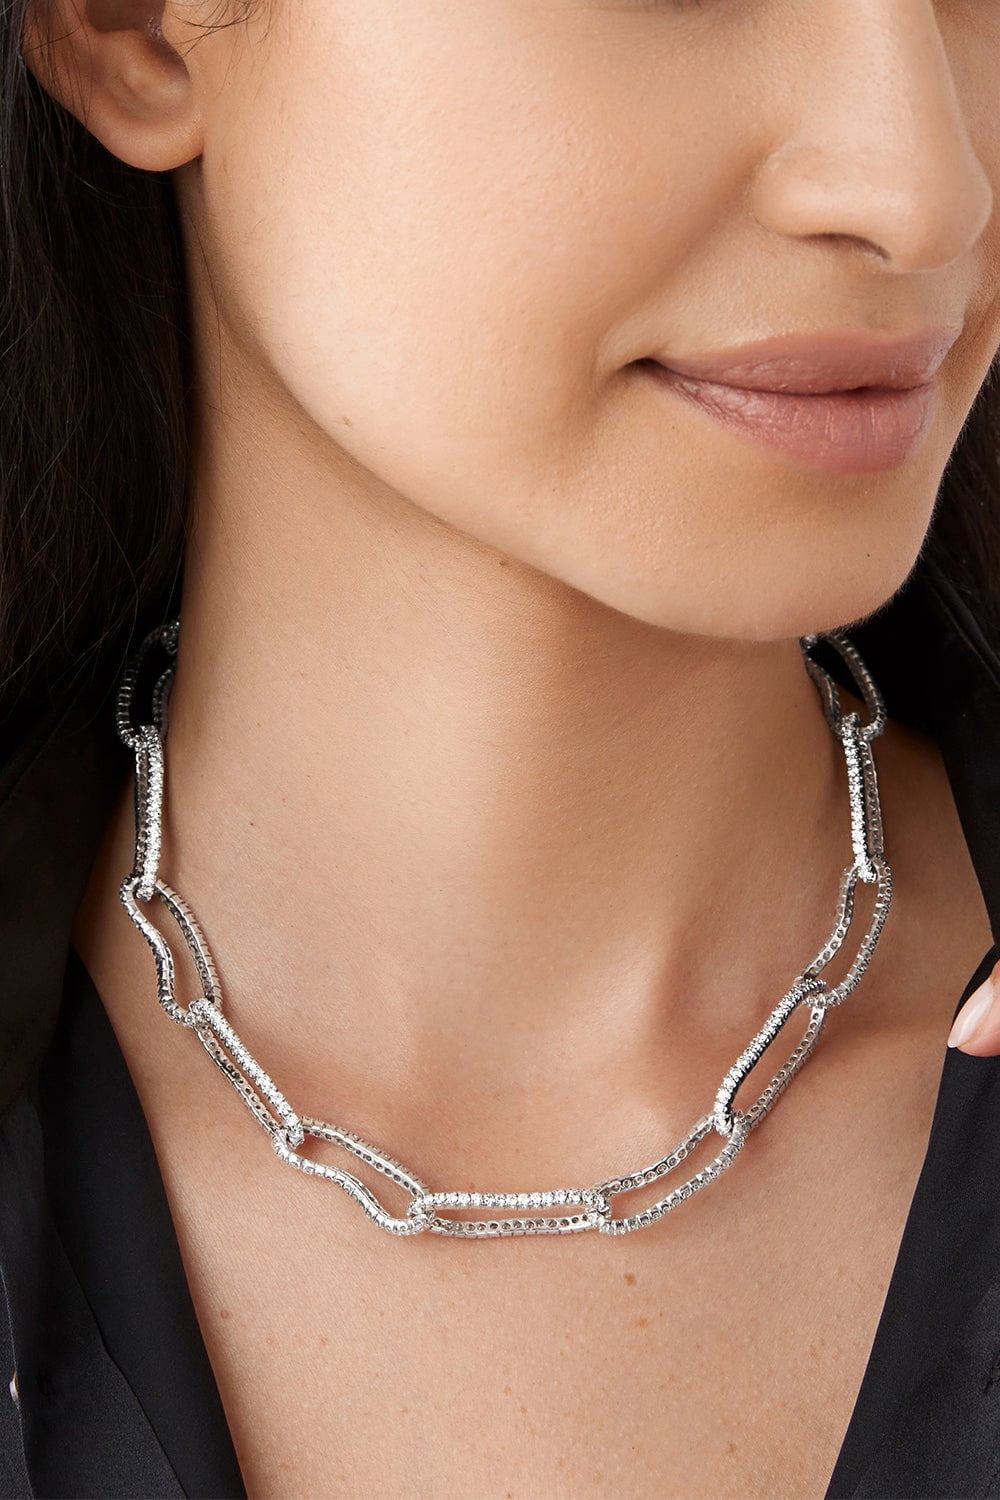 BERNARD JAMES JEWELRY-CRUSHED NECKLACE-WHITE GOLD